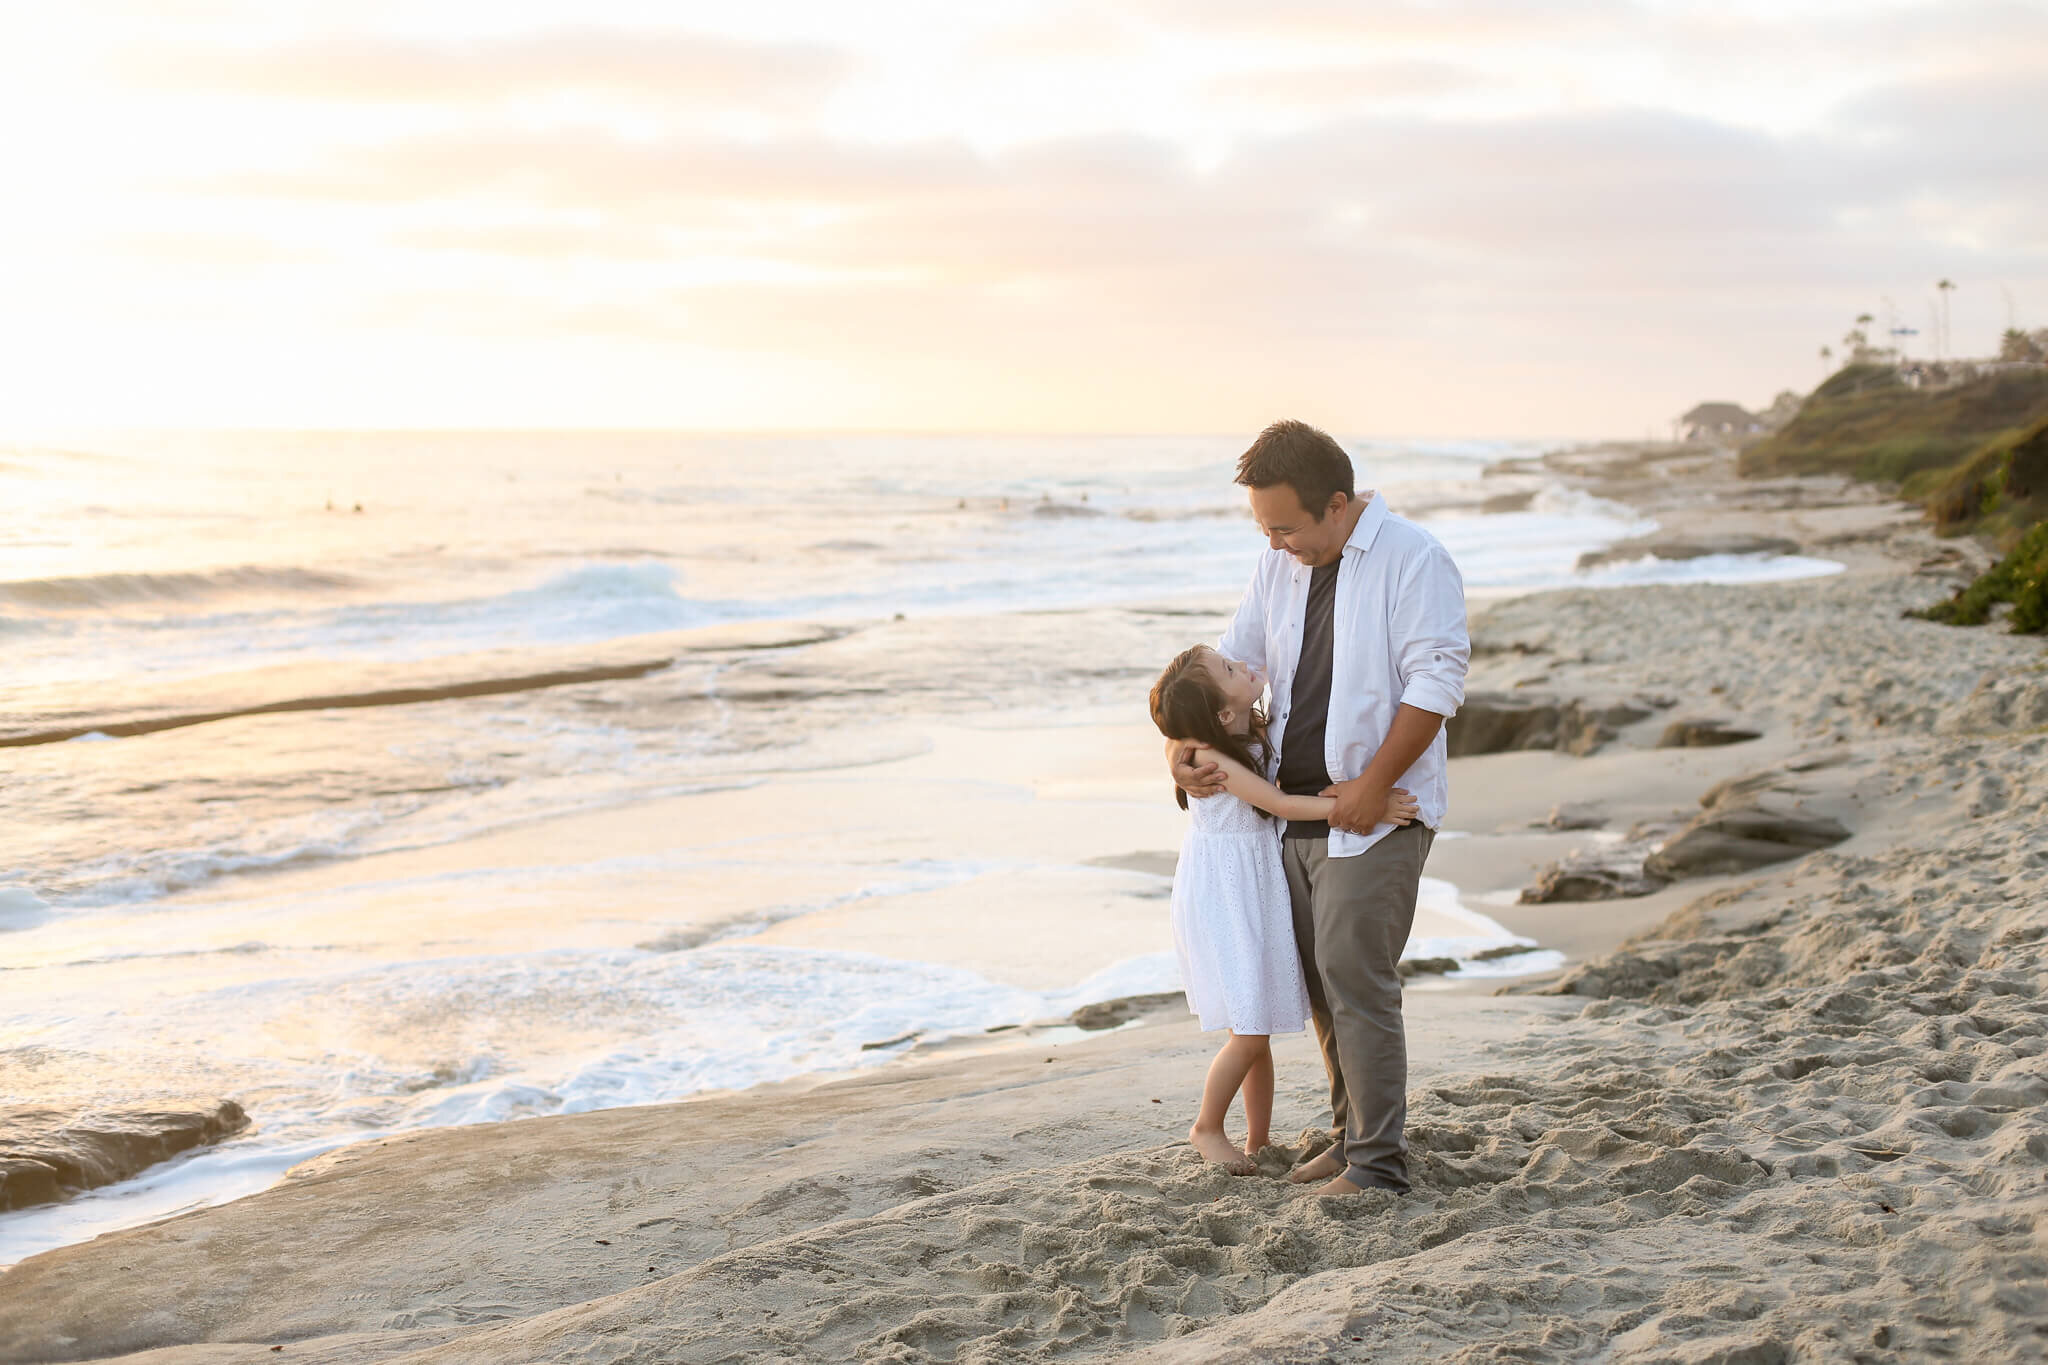  A photograph of a father gazing down at his young daughter, holding her close, as they stand on the beach at the water’s edge, spending family time together from a family photo gallery 